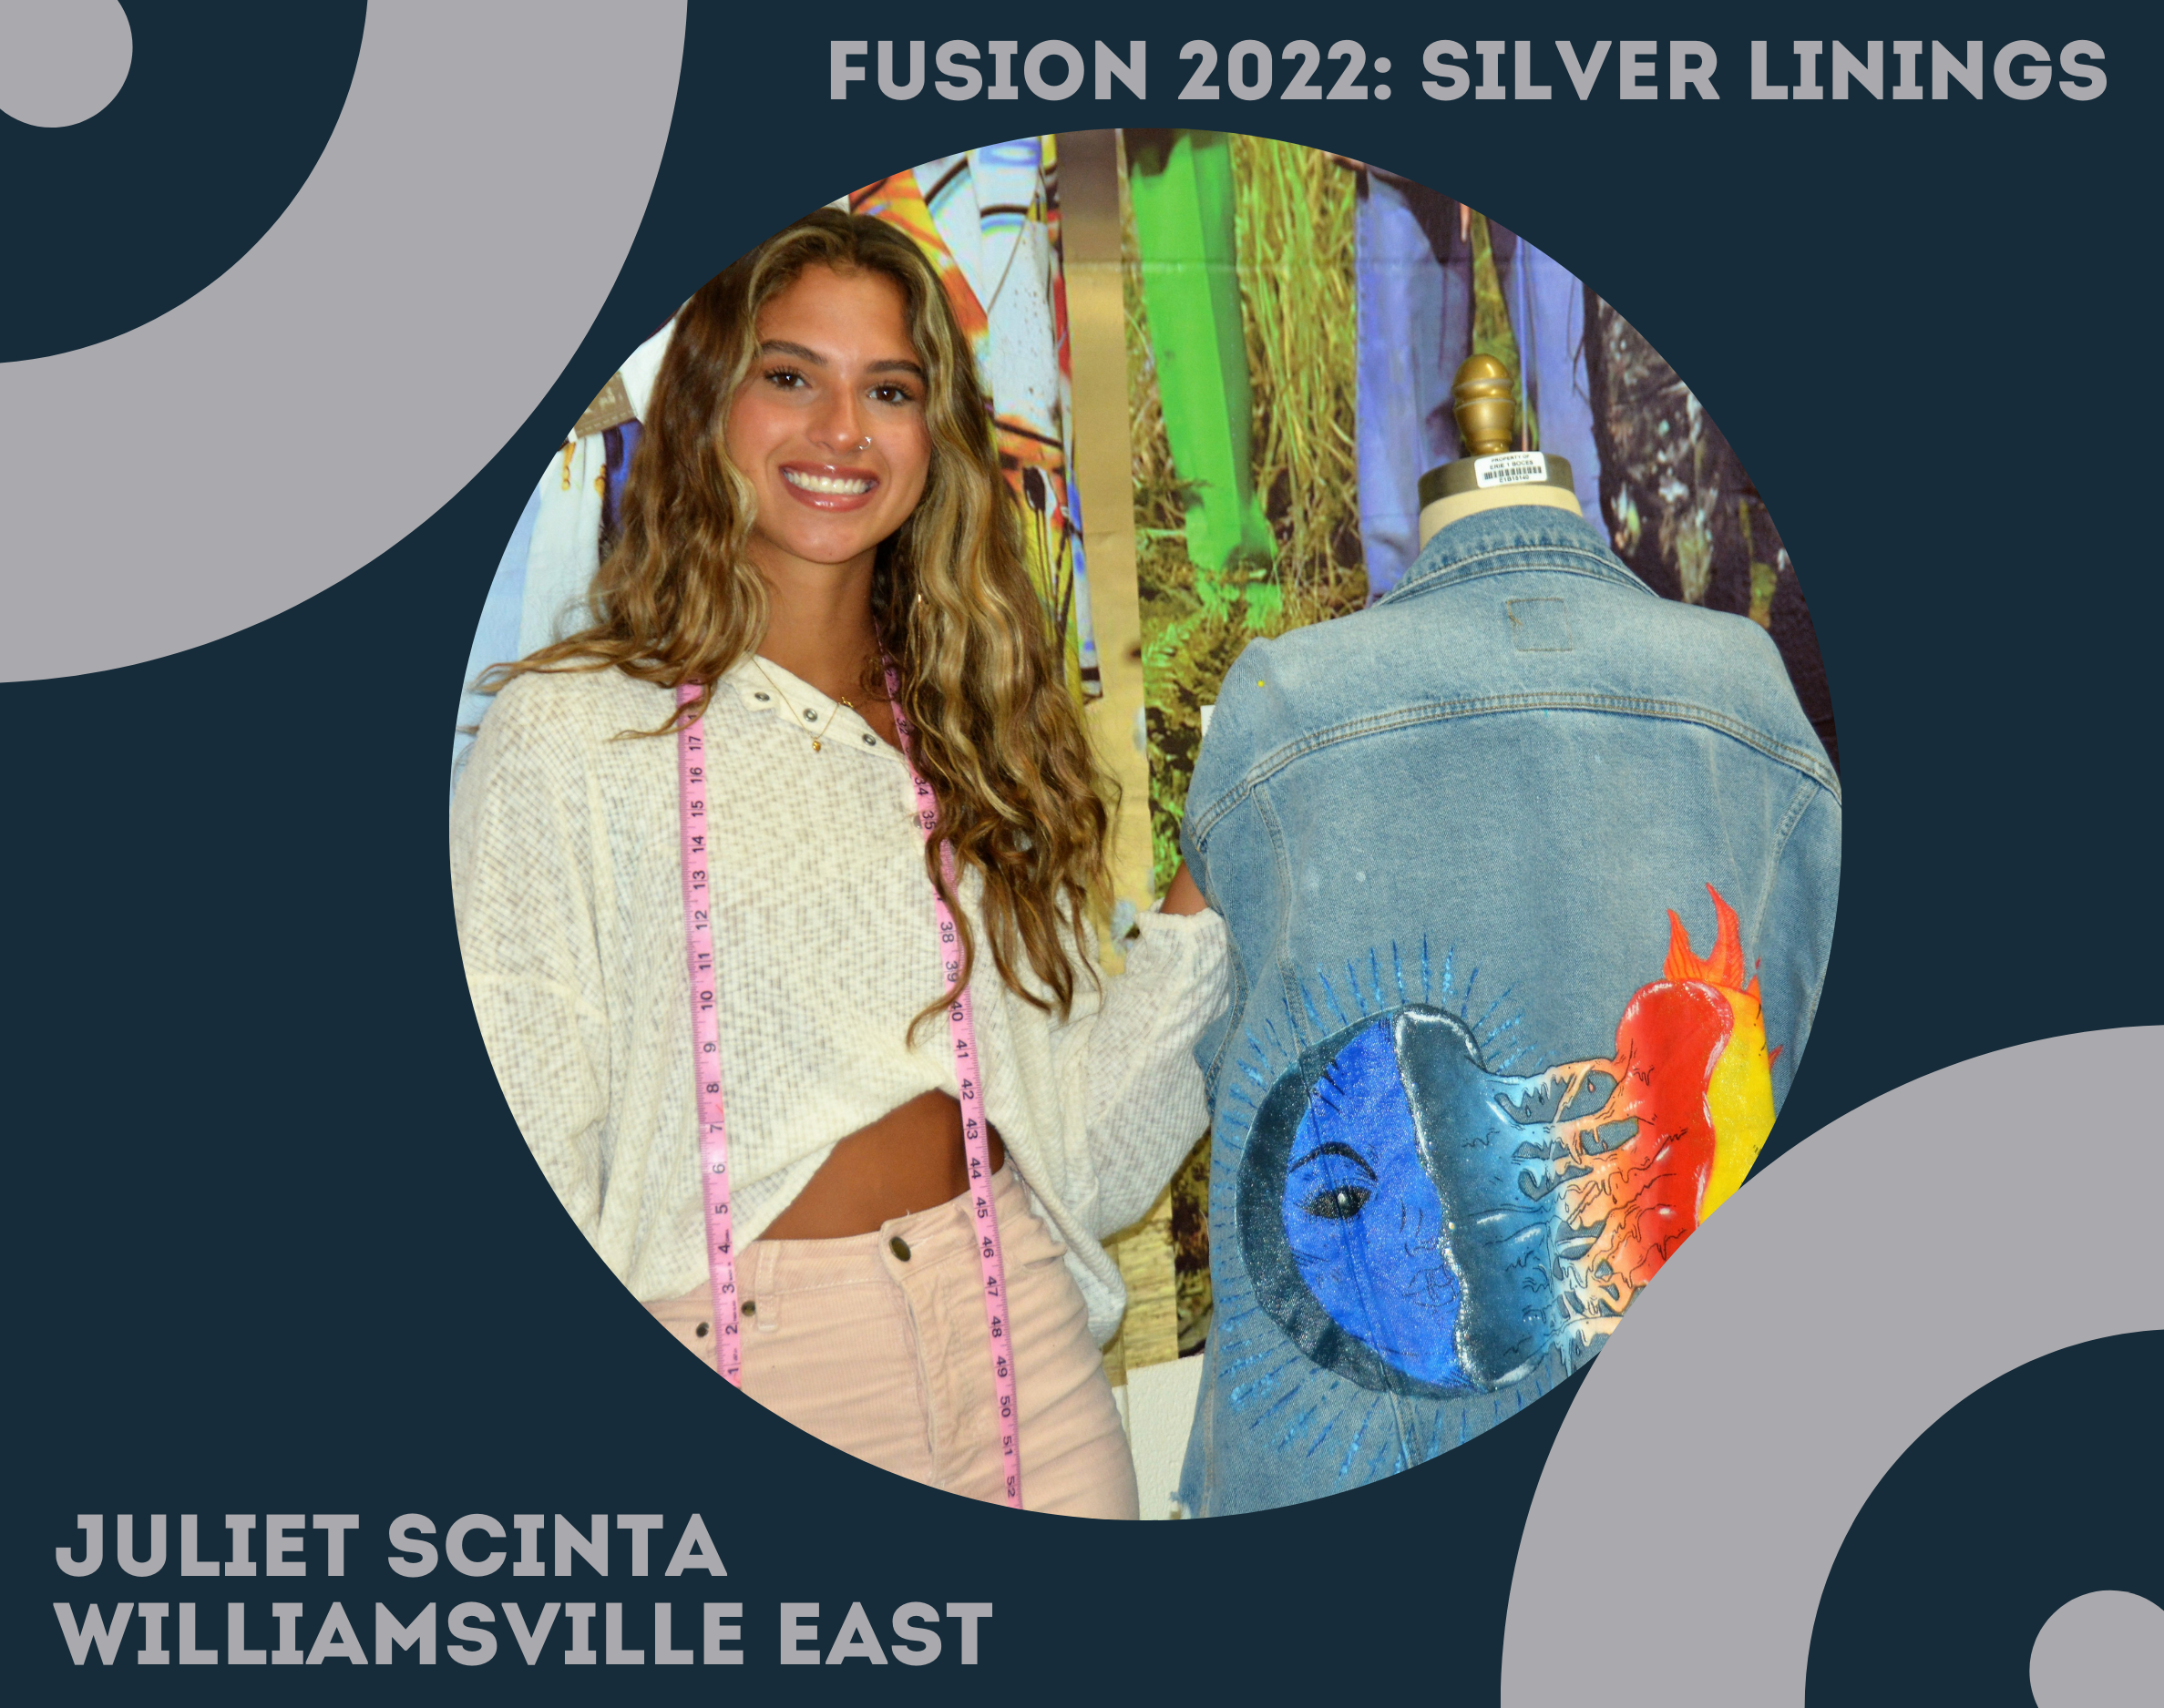 Fusion 2022: Silver Linings. Juliet Scinta, Williamsville East